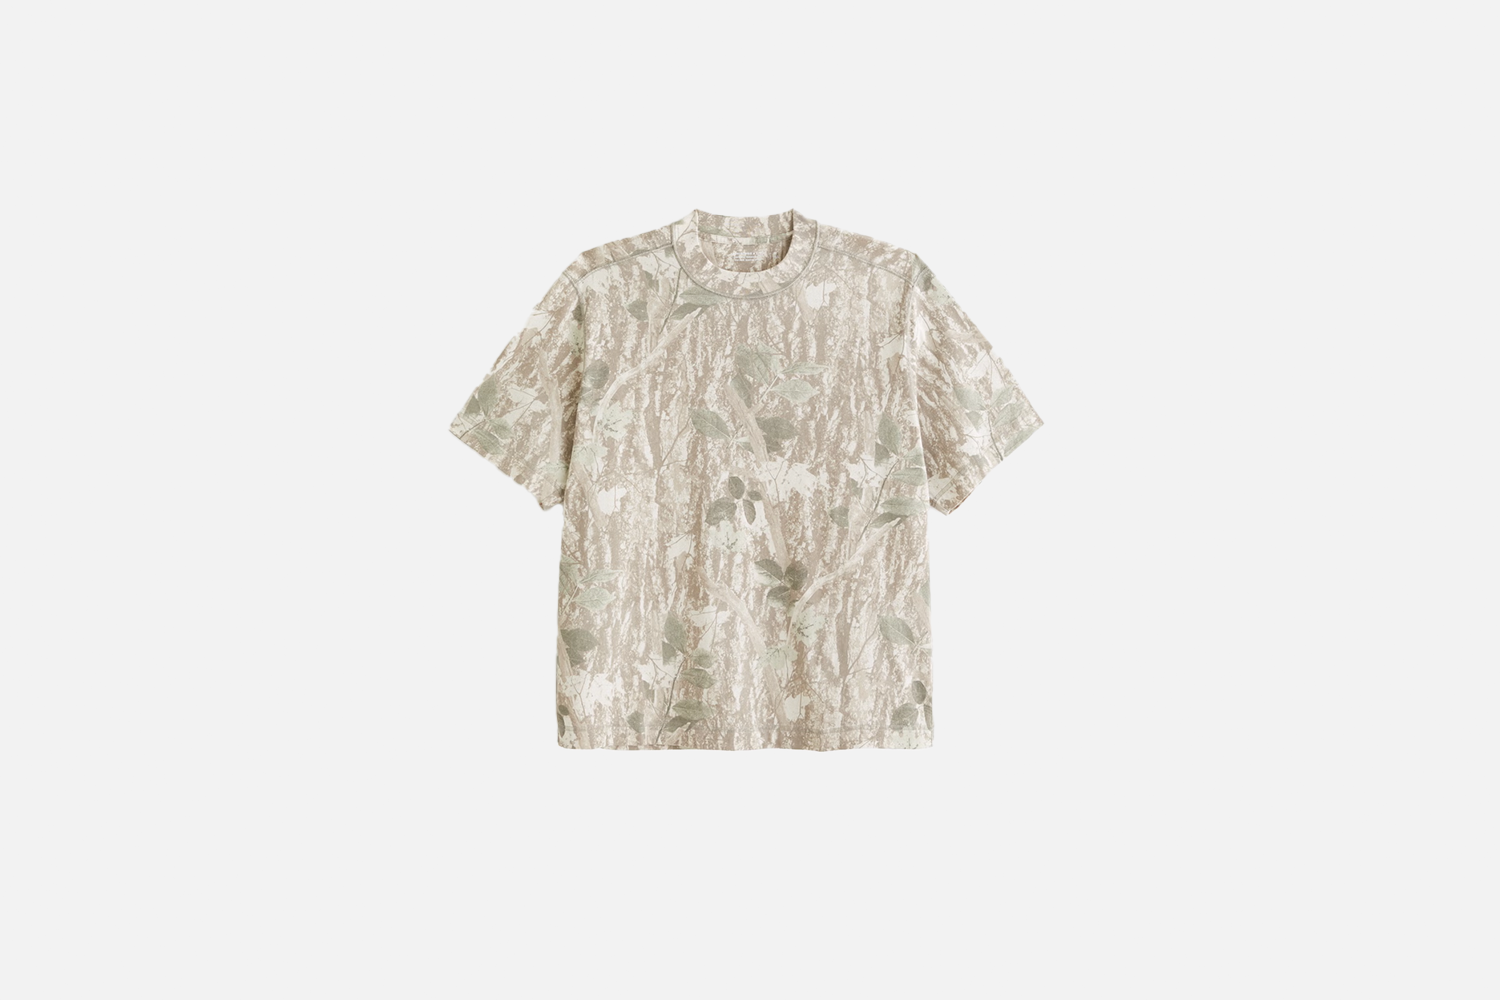 Abercrombie & Fitch Vintage-Inspired Tee